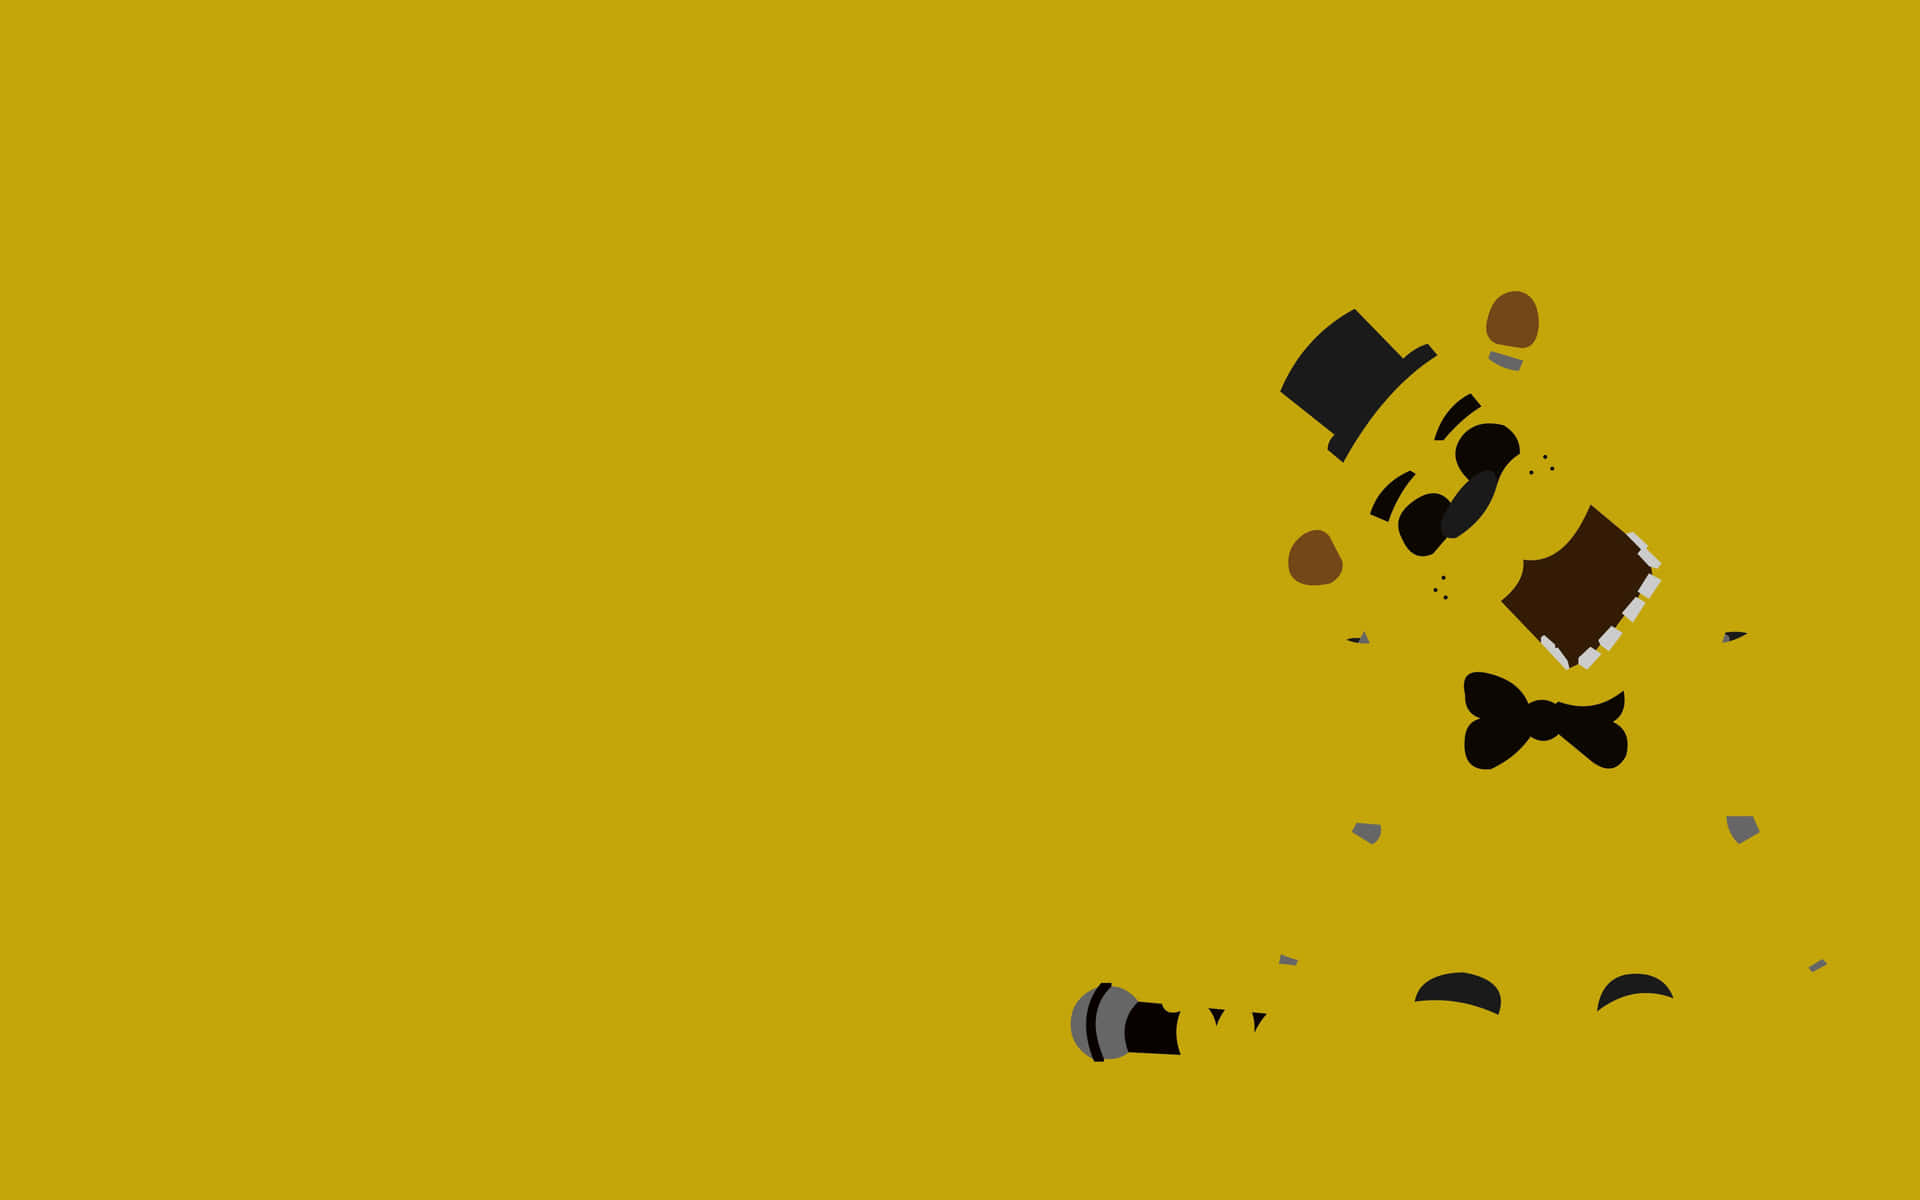 Mysterious Golden Freddy strikes a pose Wallpaper